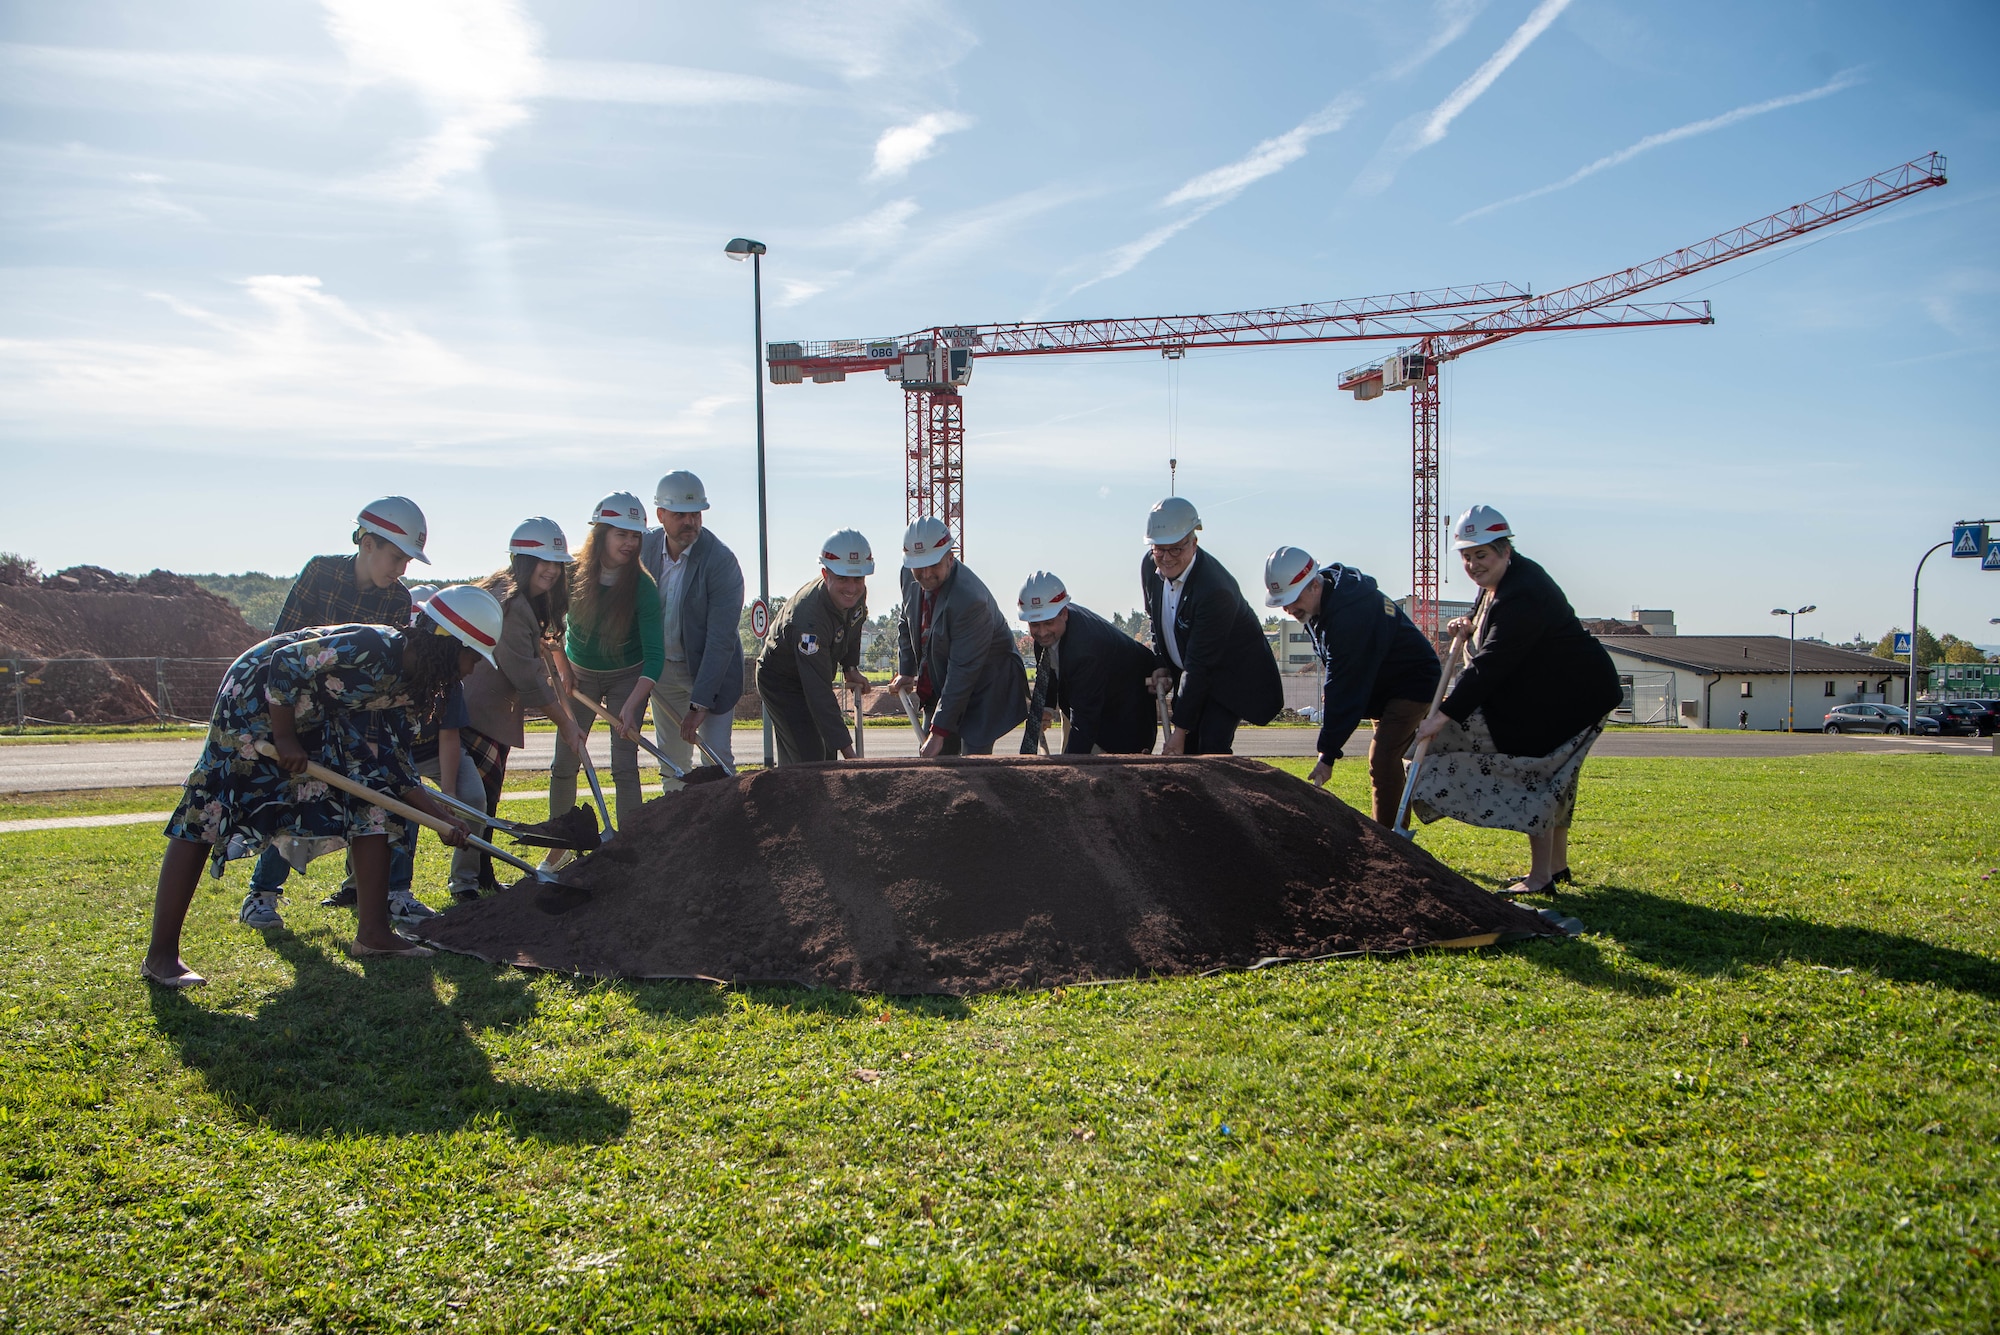 Military and civilian leaders and students wearing hard hats shovel a pile of dirt in front of cranes and construction.